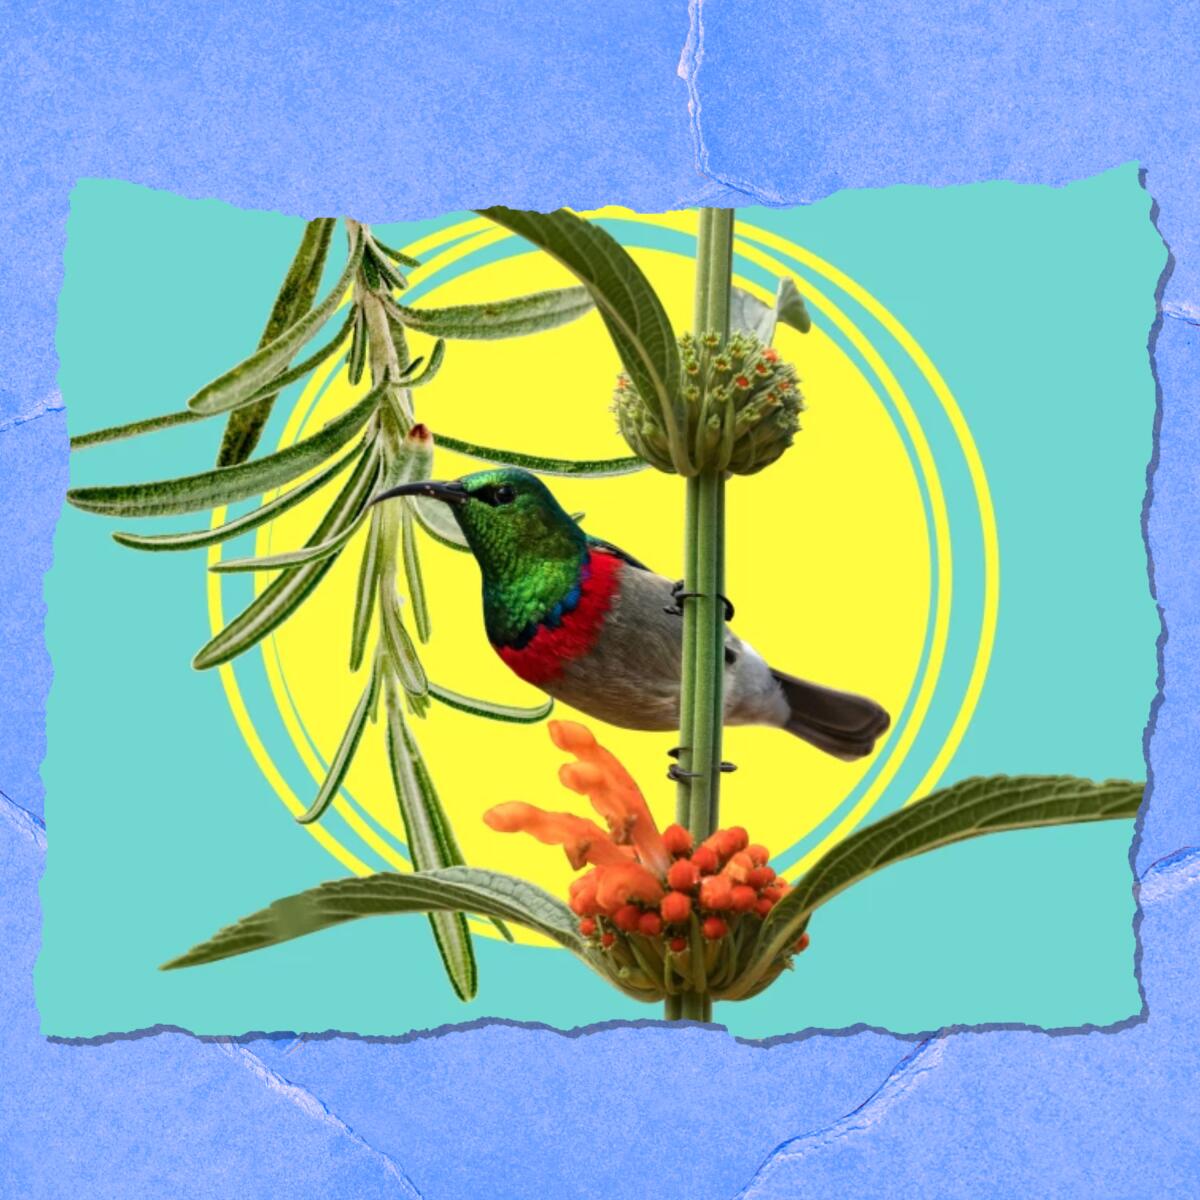 Illustration of a hummingbird on a stalk of orange lion's tail, with a sprig of rosemary behind.